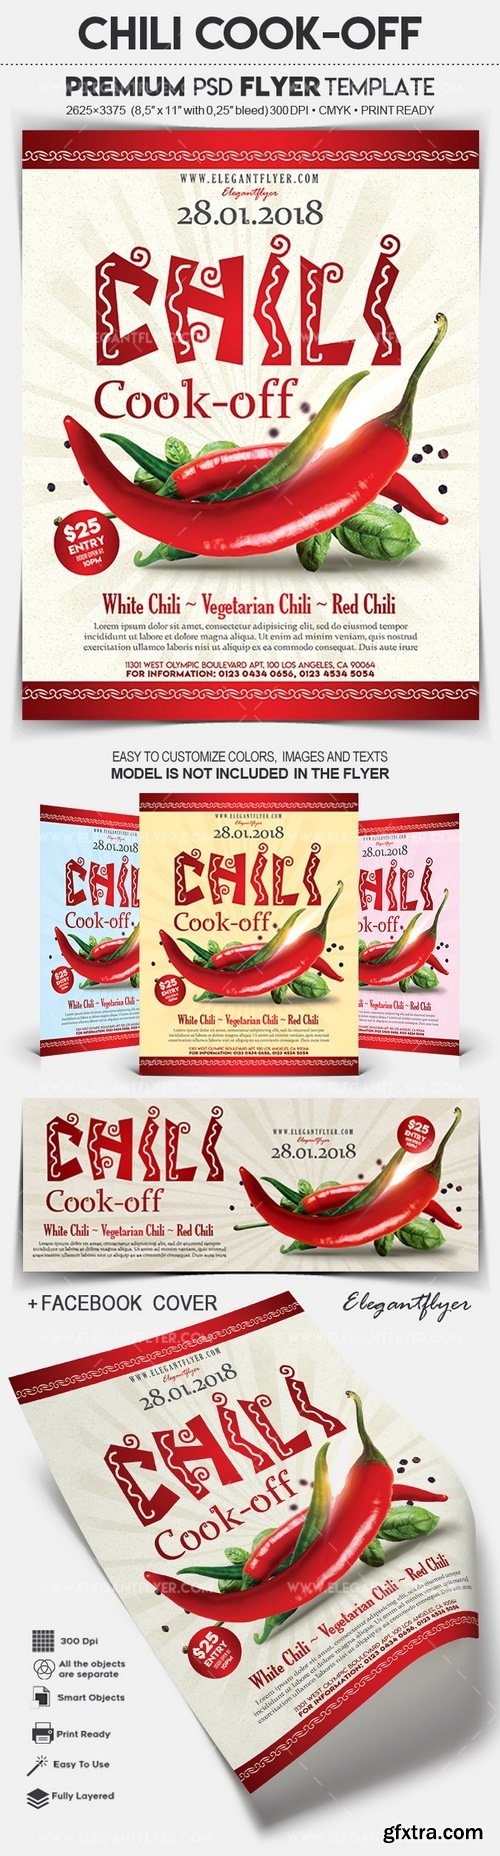 Chili Cook-off – Flyer PSD Template + Facebook Cover